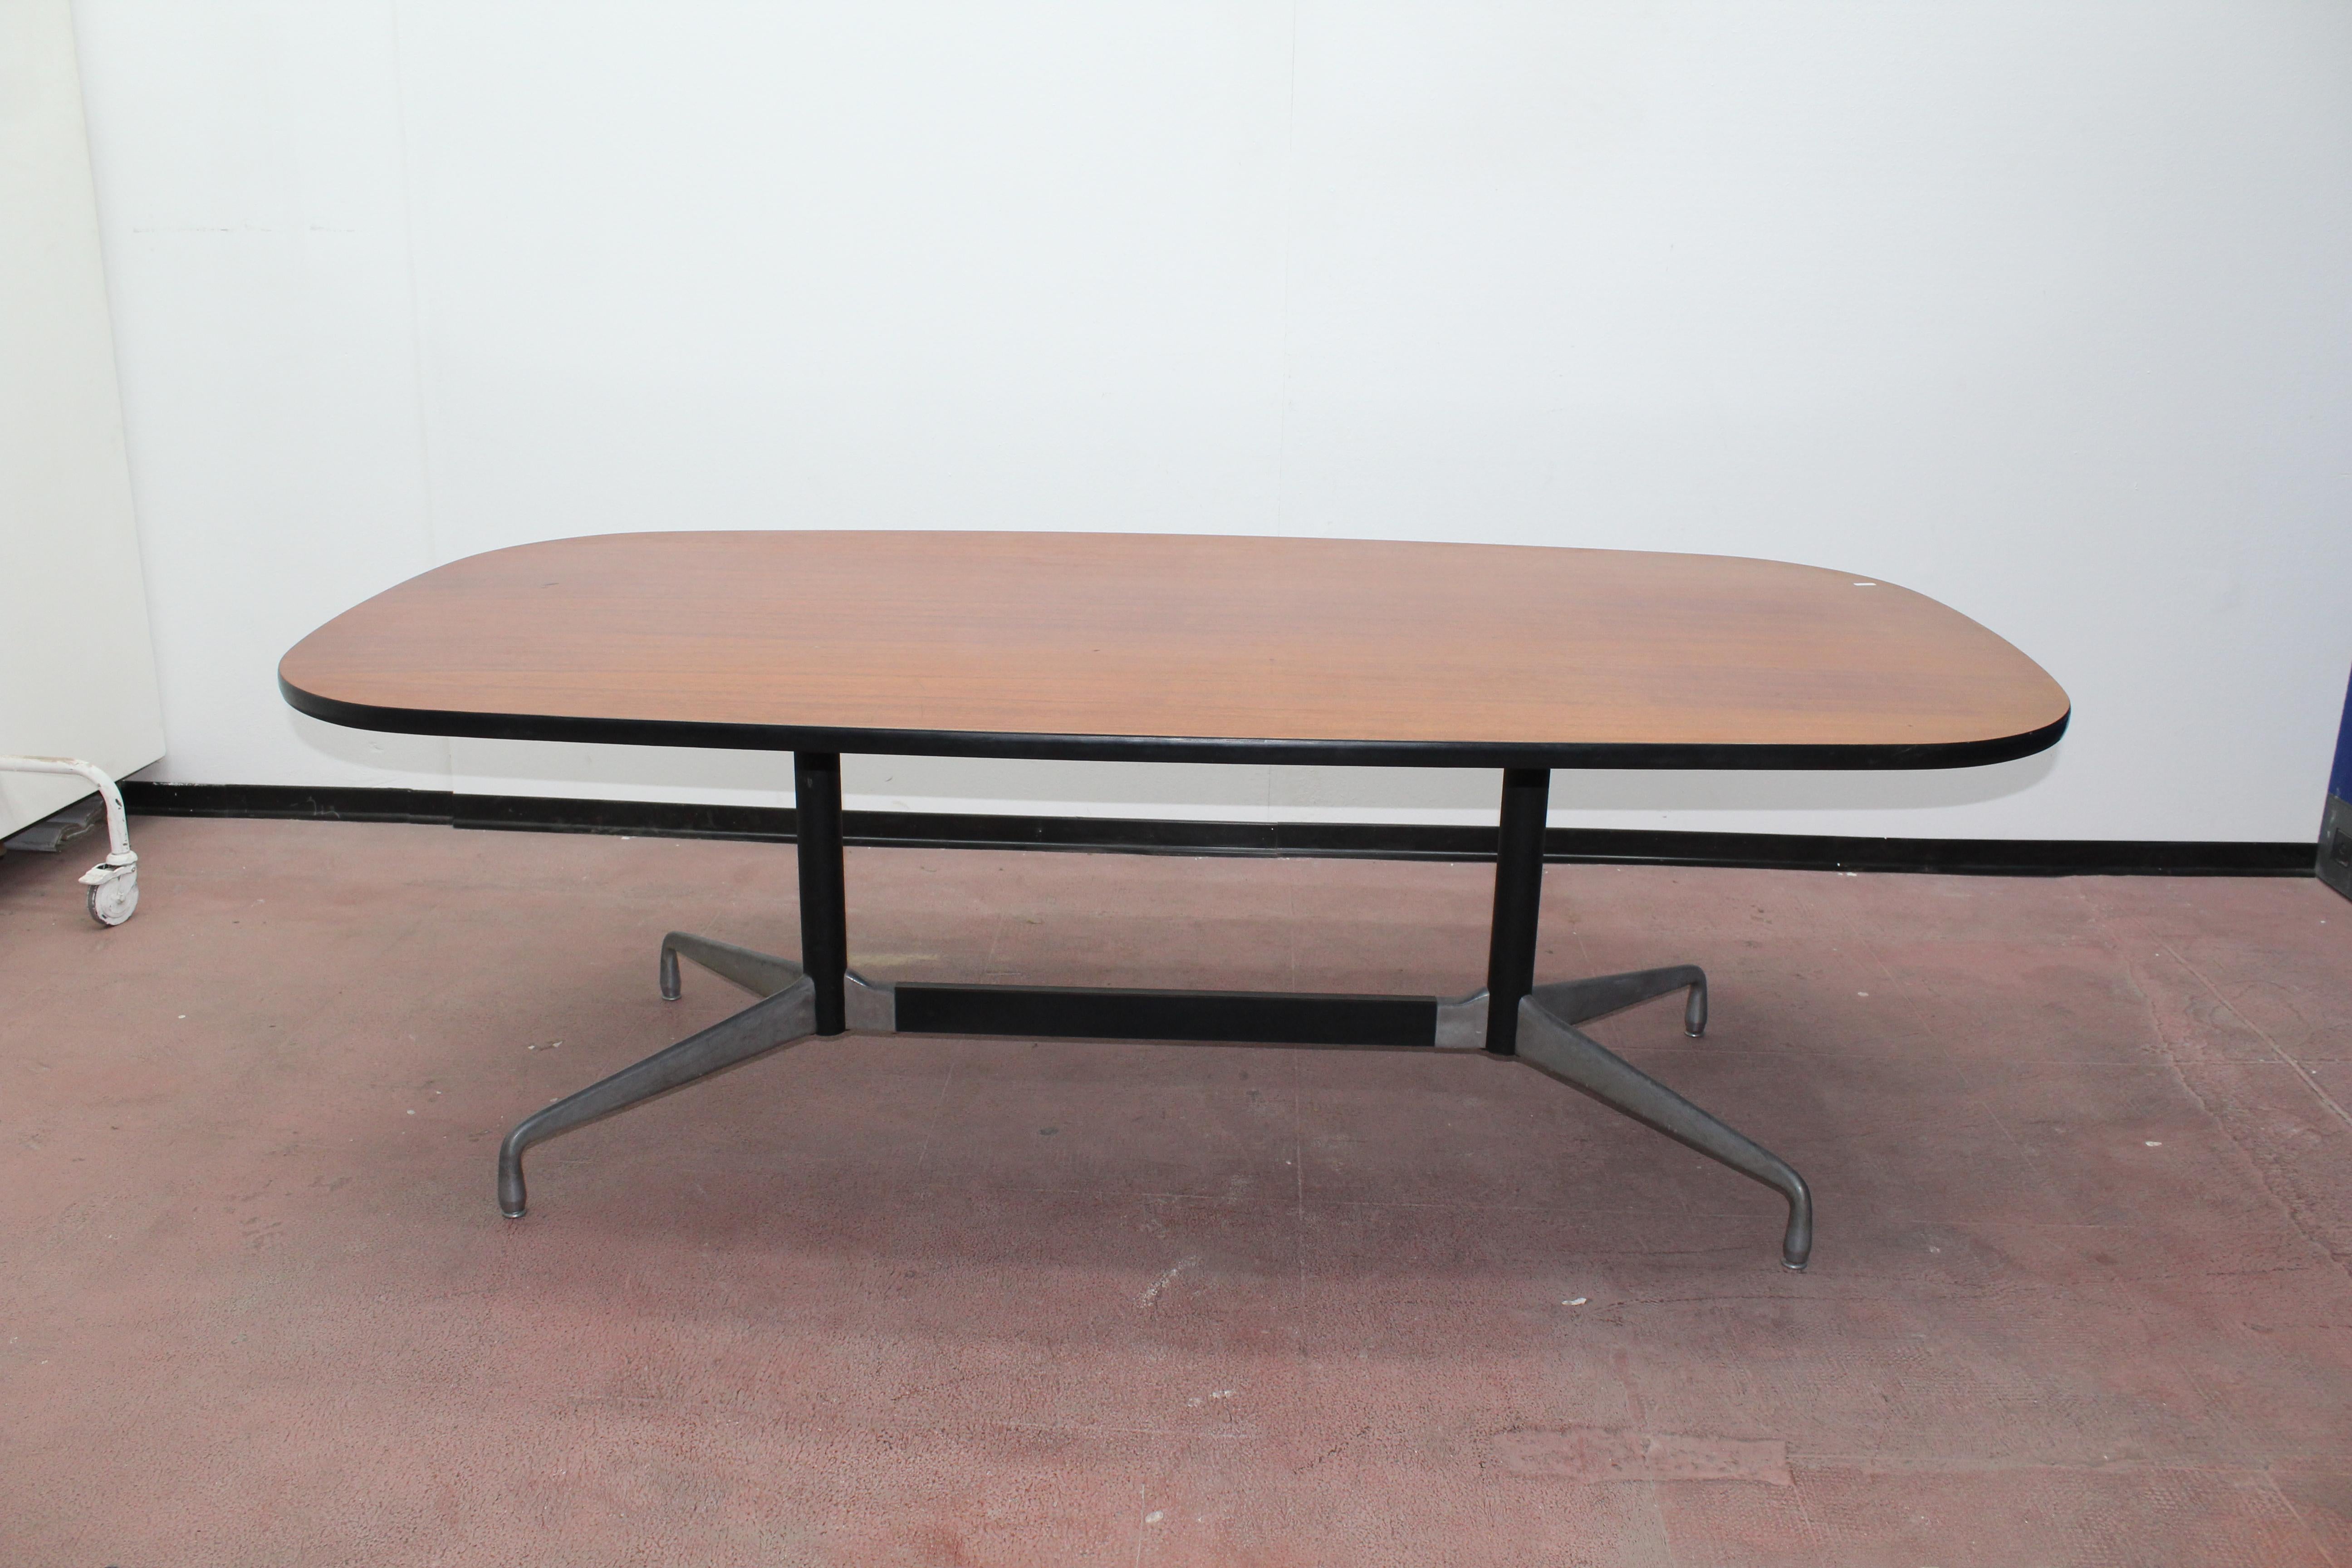 Wood 20th Century Modern Ashwood Conference Table Charles Eames 60s